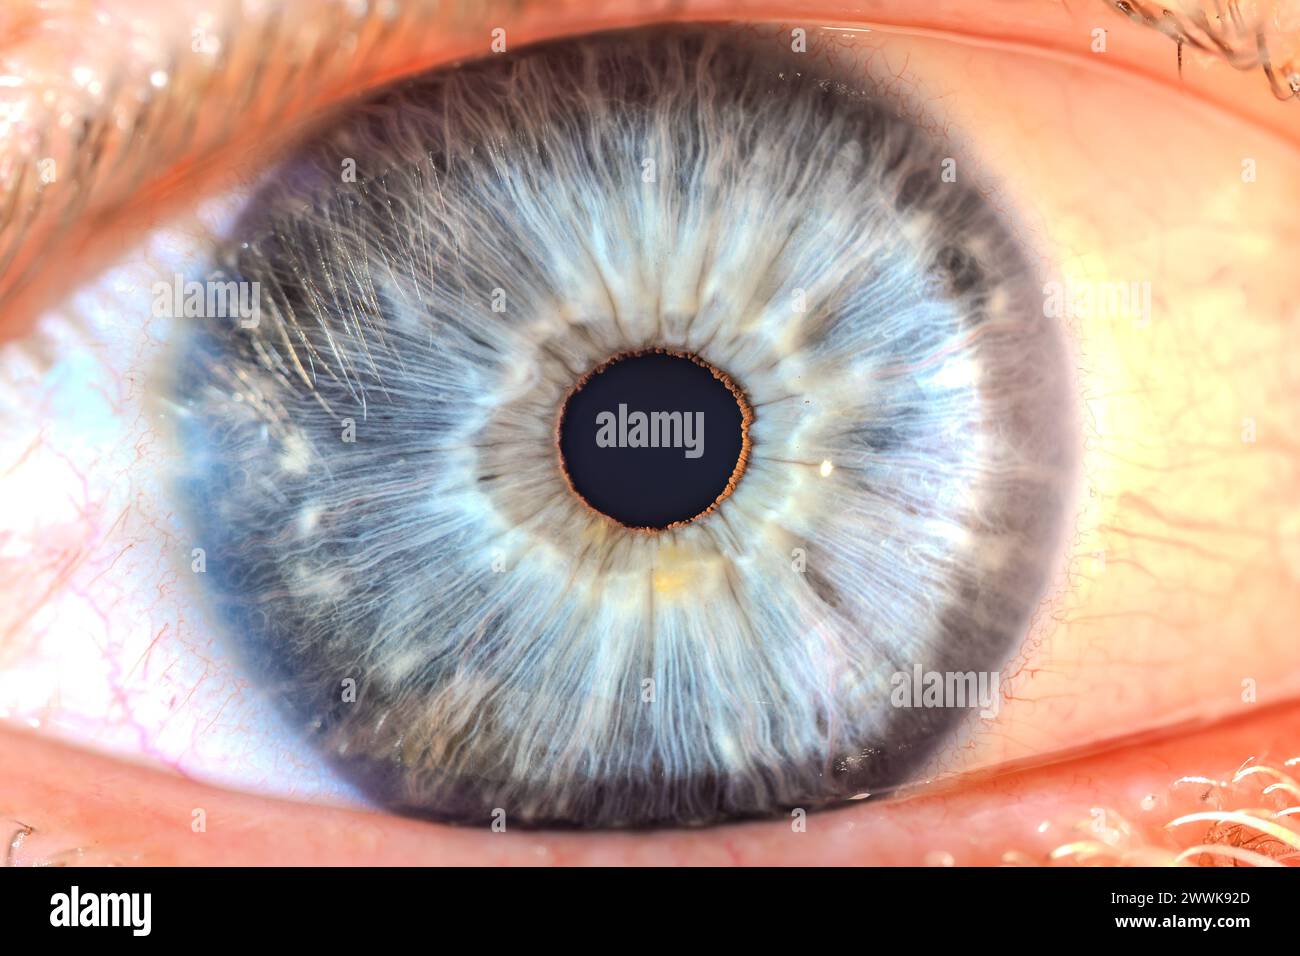 Description: Male Blue Colored Eye With Long Lashes Close Up. Structural Anatomy. Human Iris Super Macro Detail. Stock Photo